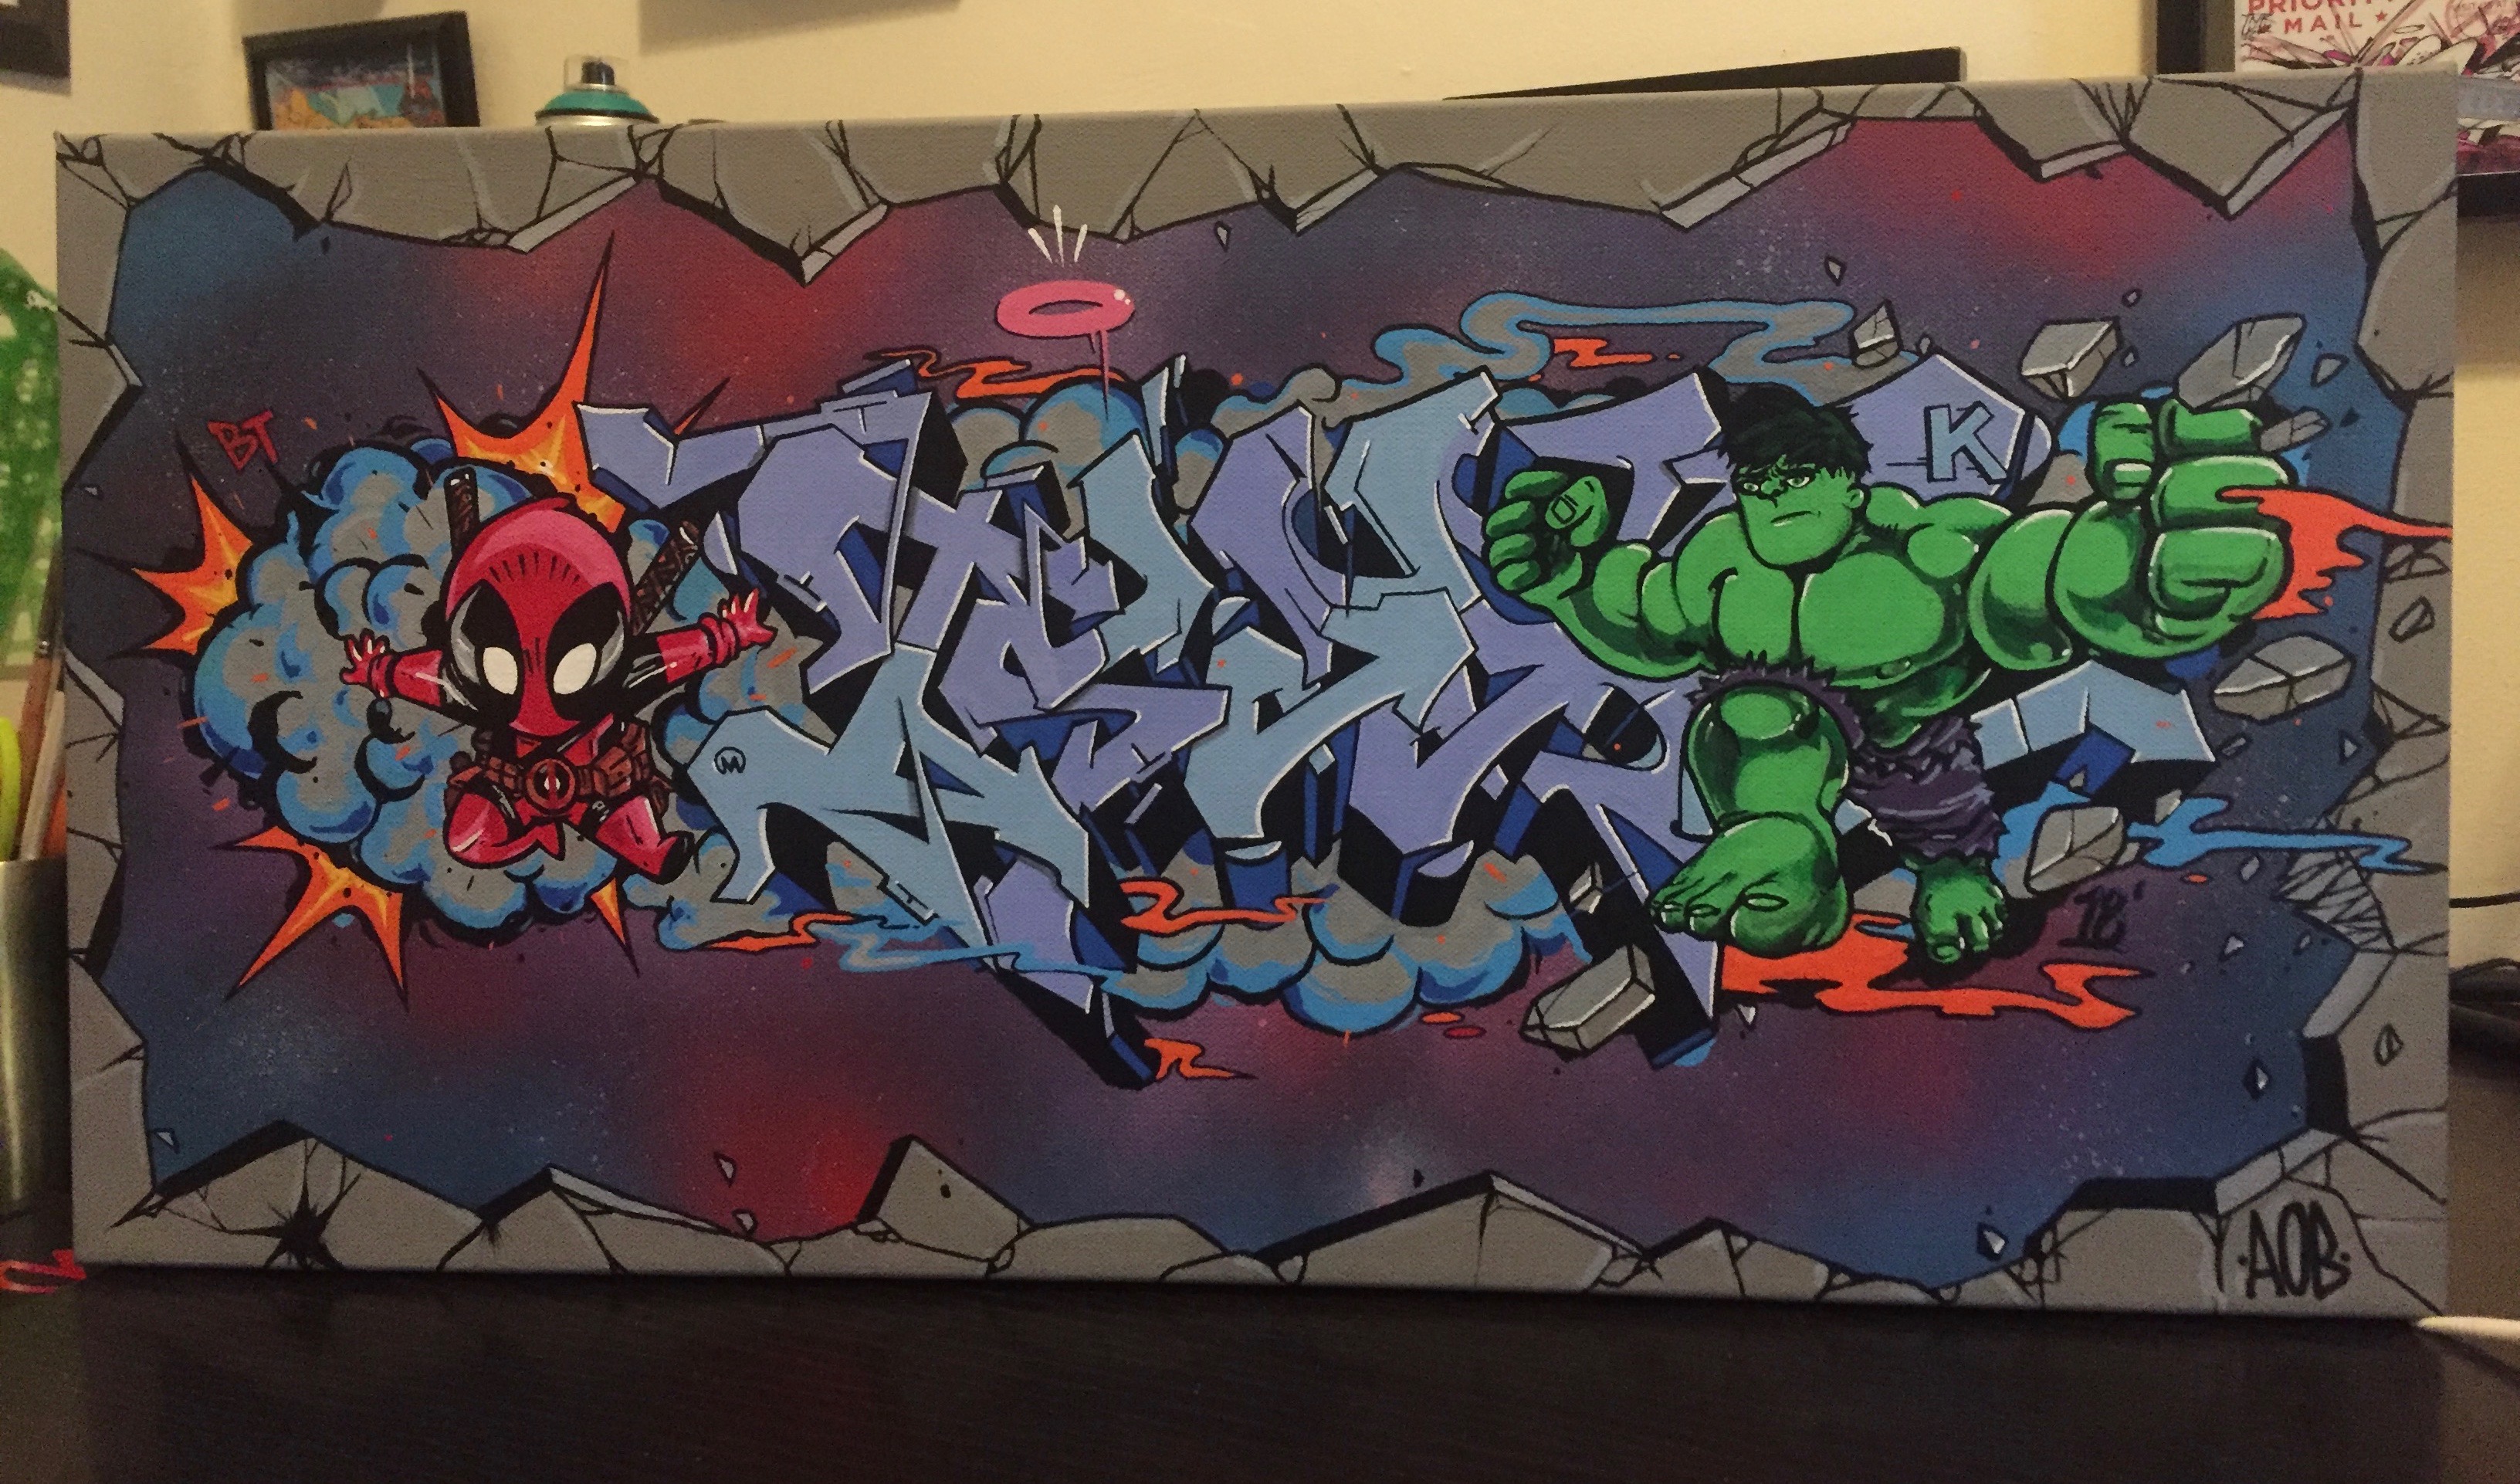 Hulk x Spider-Man, "ISAAK" by Nover. Spray Paint & Markers on Canvas. 2018.